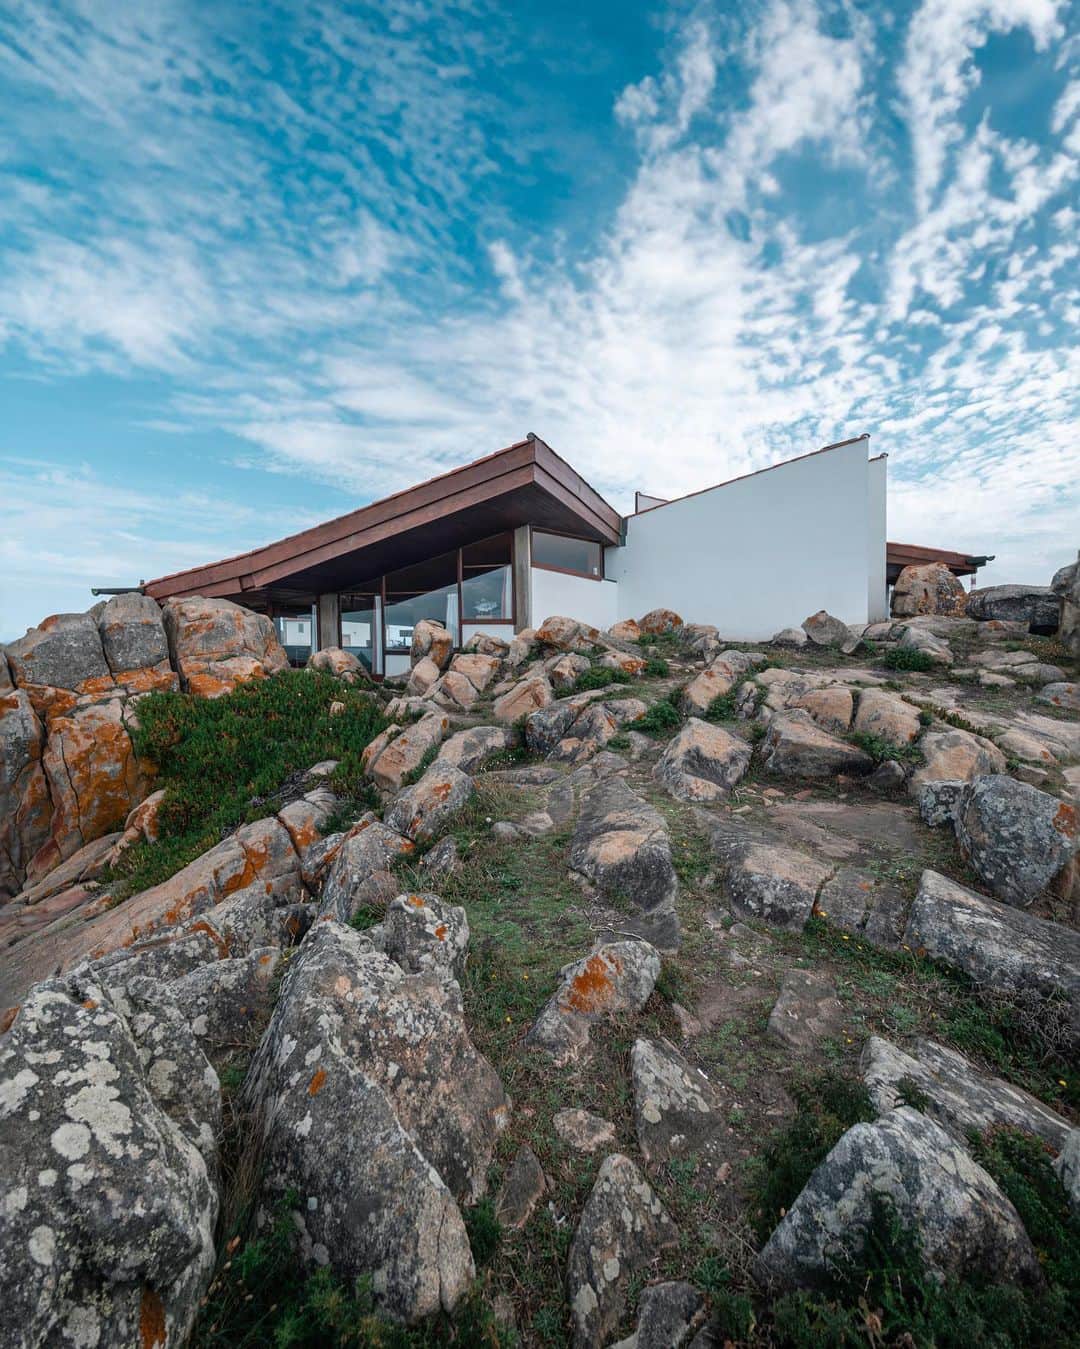 Nicanor Garcíaのインスタグラム：「Between the sky and the ground : Entre el cielo y el suelo #nicanorgarcia @travelarchitectures @tours_casadarquitectura   Strategically located between the rocks and outlined by the horizon and the light, the Tea House in Boa Nova by Alvaro Siza has been a national monument since 2011 and an essential architectural landmark.  Thanks to @casadaarquitectura it is possible to visit it (many thanks for the recent tour!). You can check their website to book a visit too.  #itinerariosiza #casadaarquitectura #centroportuguesdearquitectura @loja_casadaarquitectura #lojadacasa #arquiteturaportuguesa #matosinhos #porto #alvarosiza」